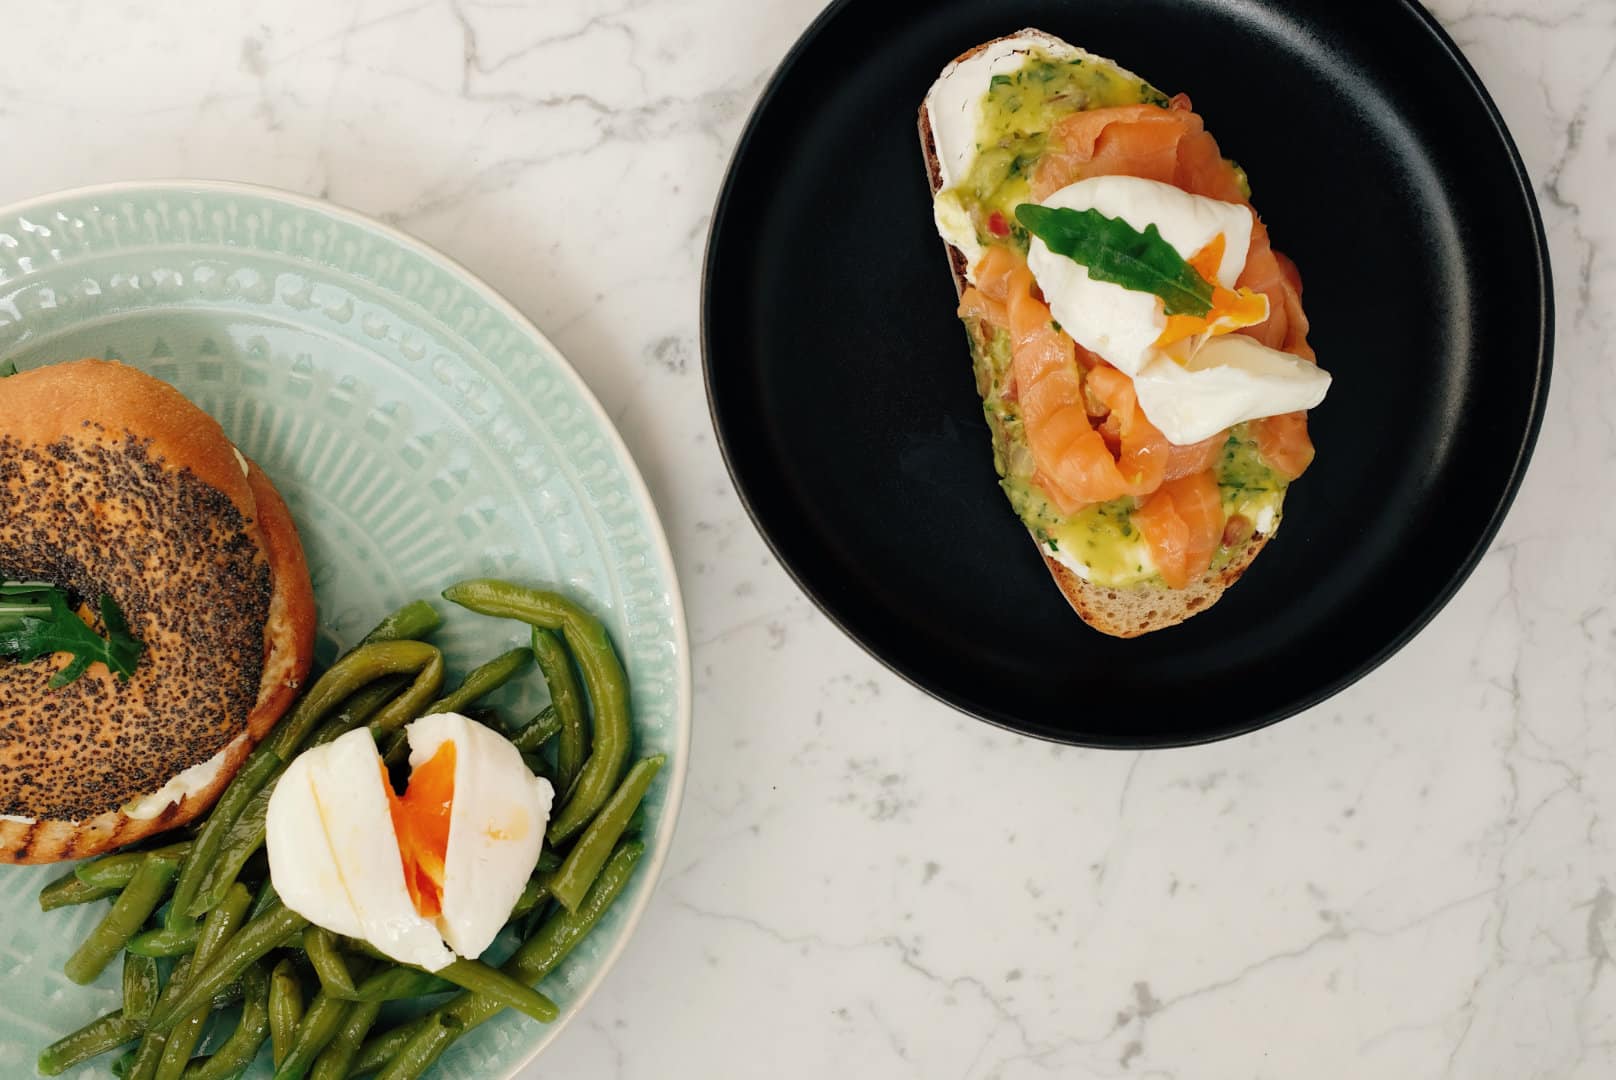 tow plates with food on them. One plate has a salmon and cream cheese bagel along with a soift boiled egg and green beans, the other a slice of toast with creme fraiche and salmon.